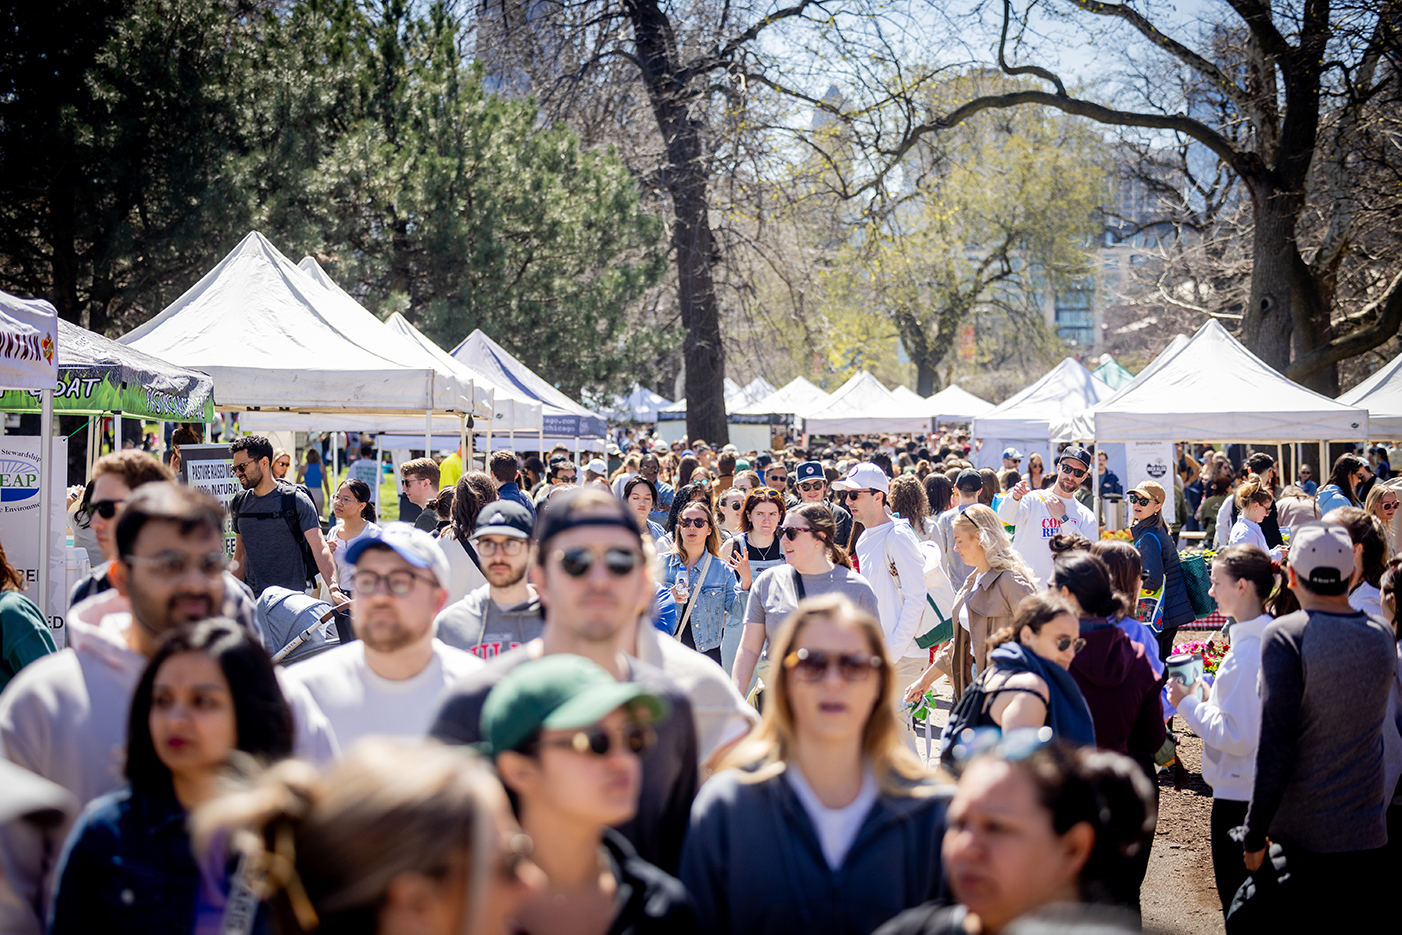 A crowd of people walks between tents at a farmers market